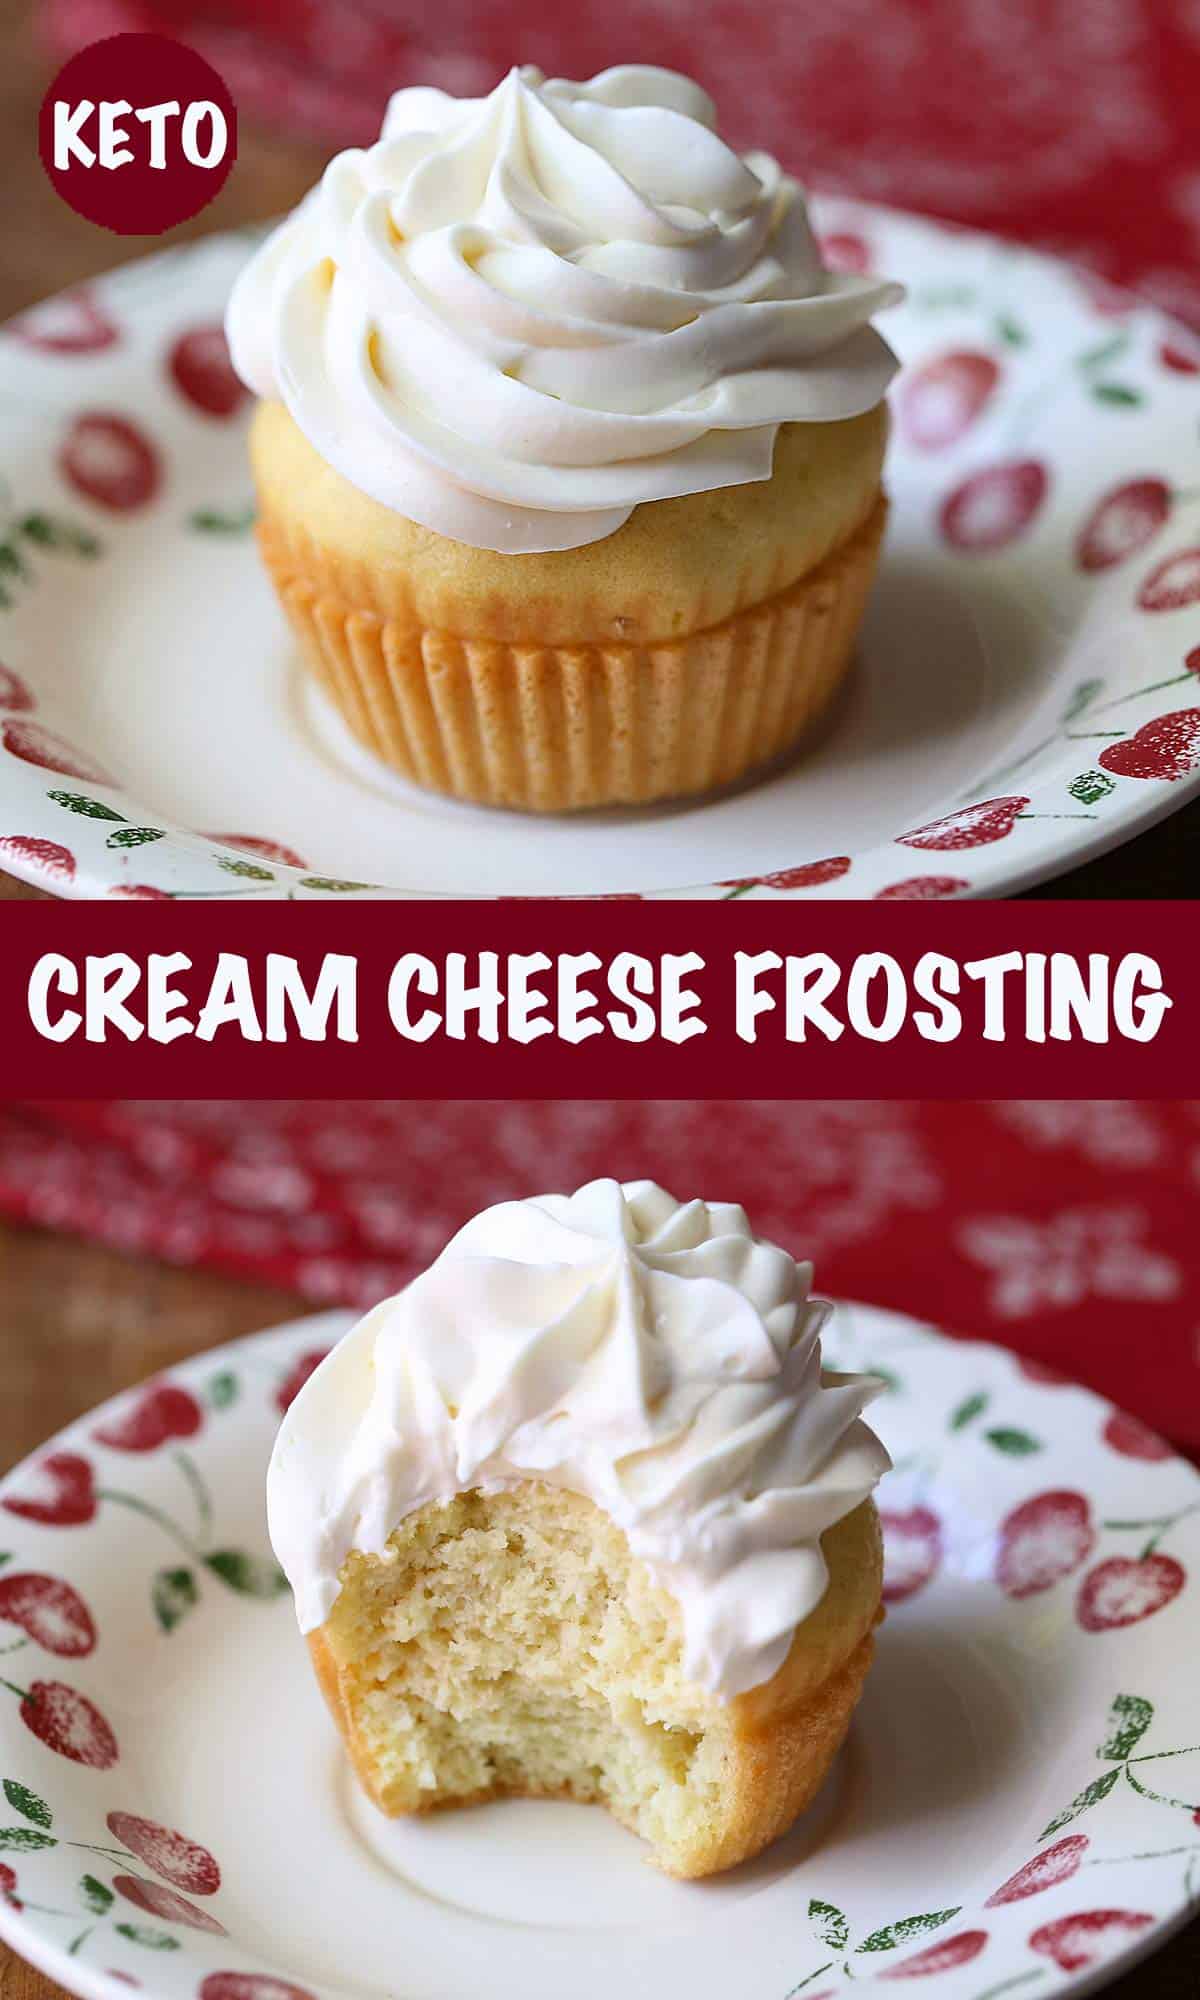 A 2-photo collage showing a cupcake topped with keto cream cheese frosting. 